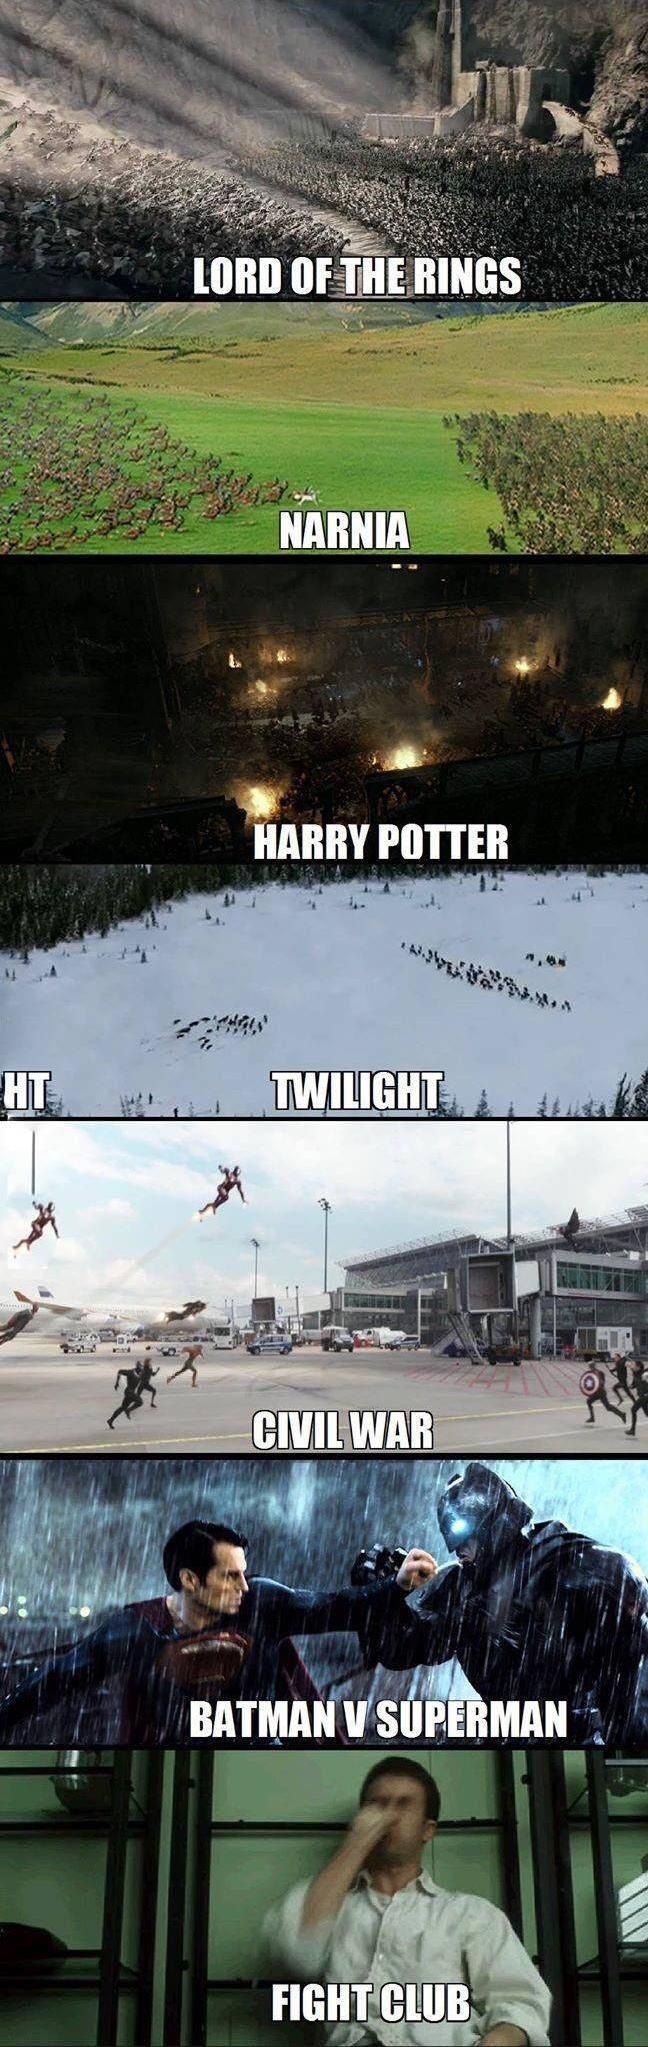 Epic battles in movies....